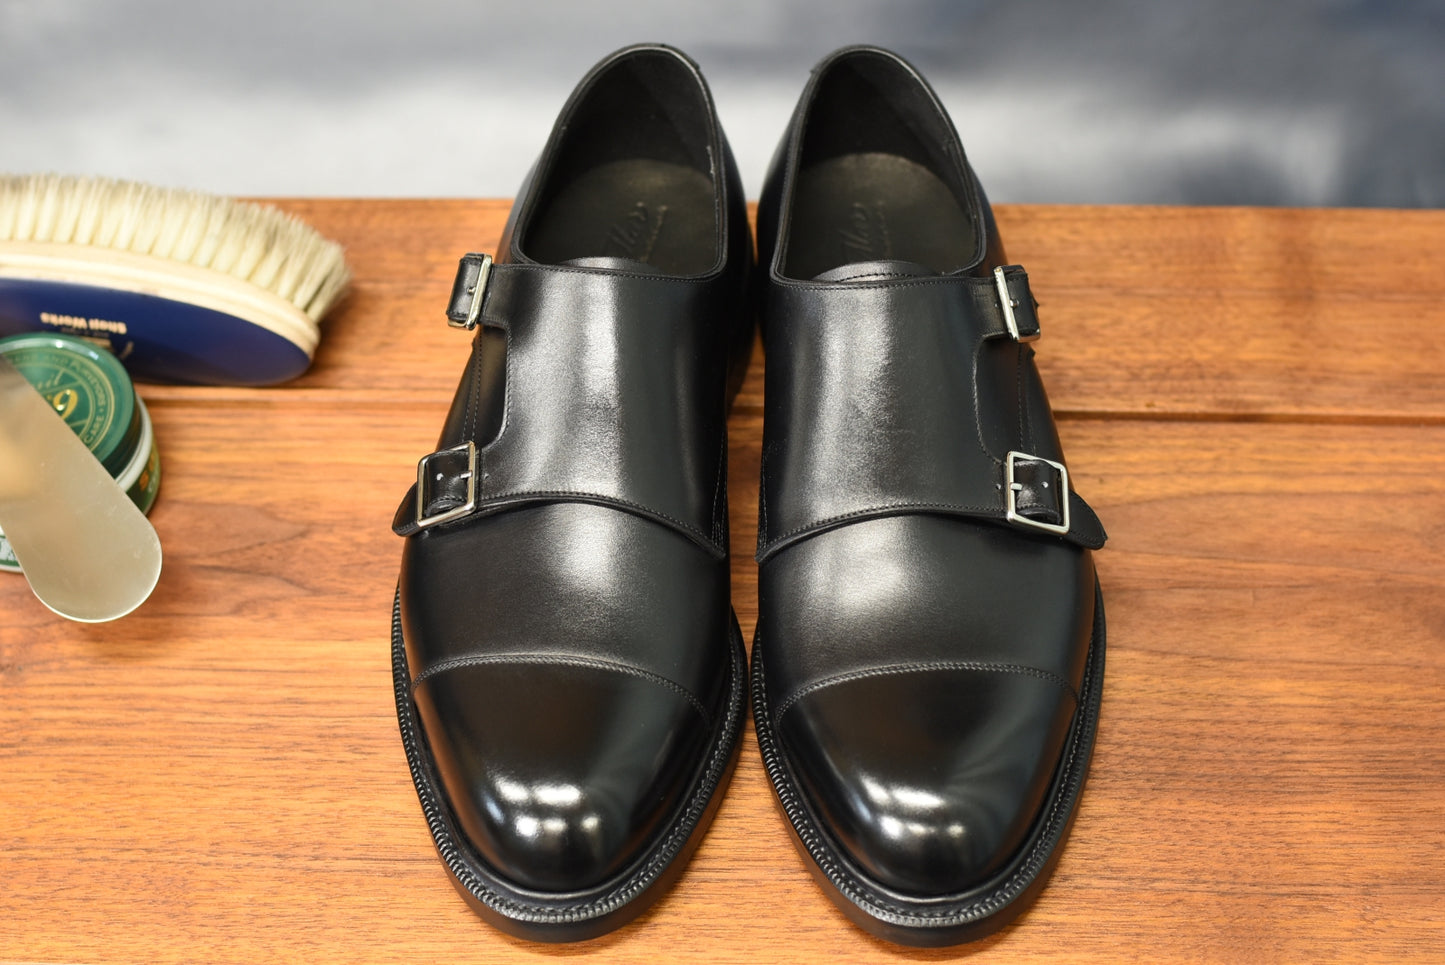 “Ted” Double Monk Strap, Black Dress Shoes, Weinheimer Box calf, Goodyear welted, US size 5 1/2 ~ 10